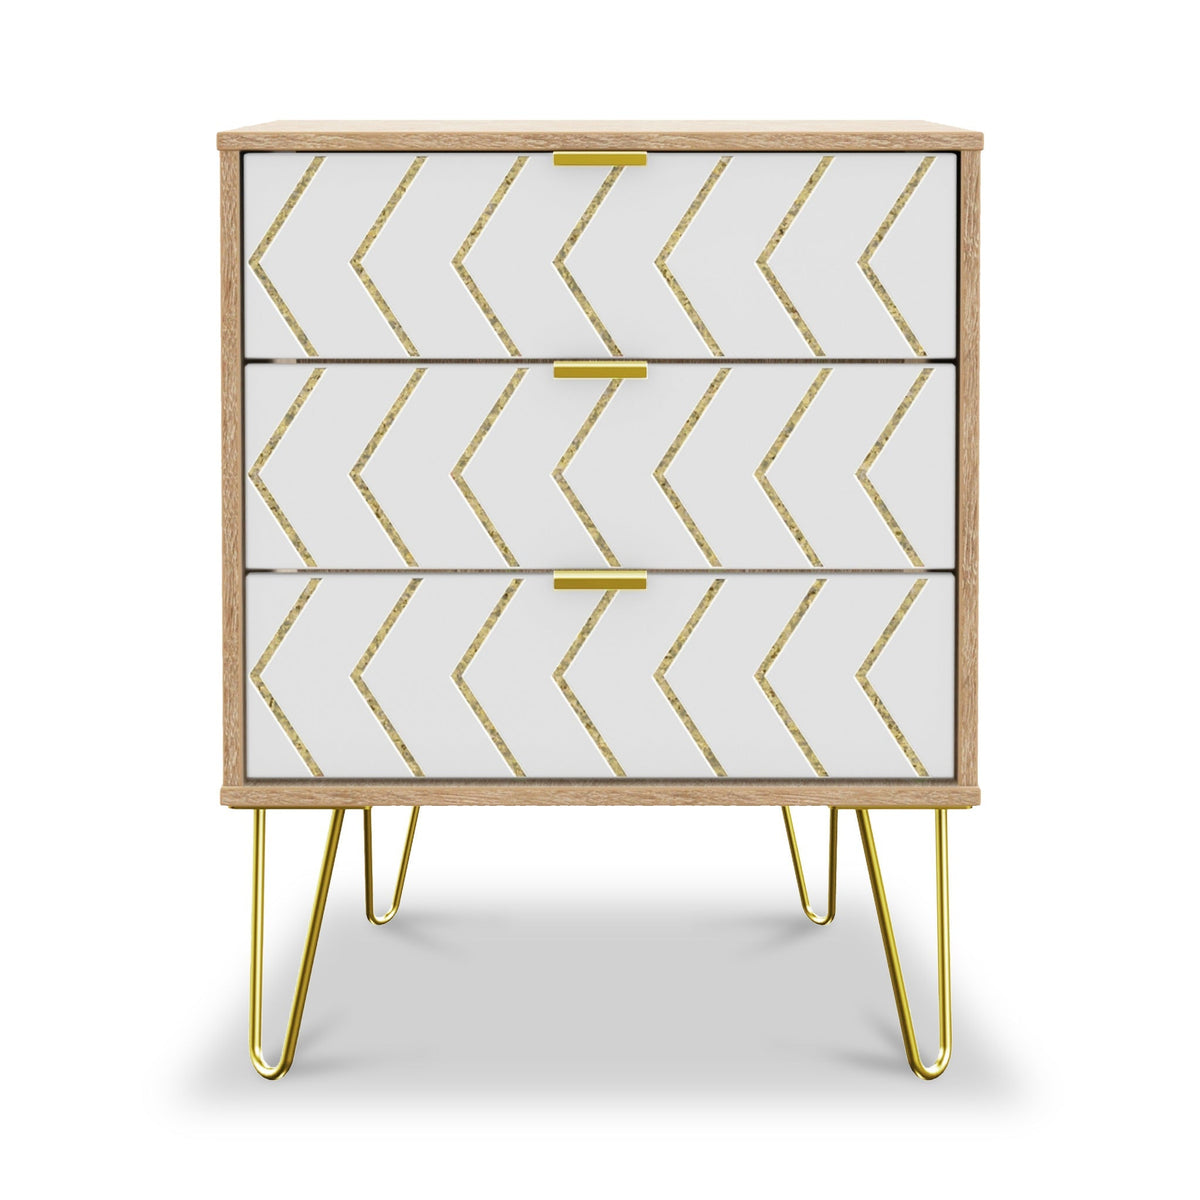 Mila White with Gold Hairpin Legs 3 Drawer Sideboard from Roseland